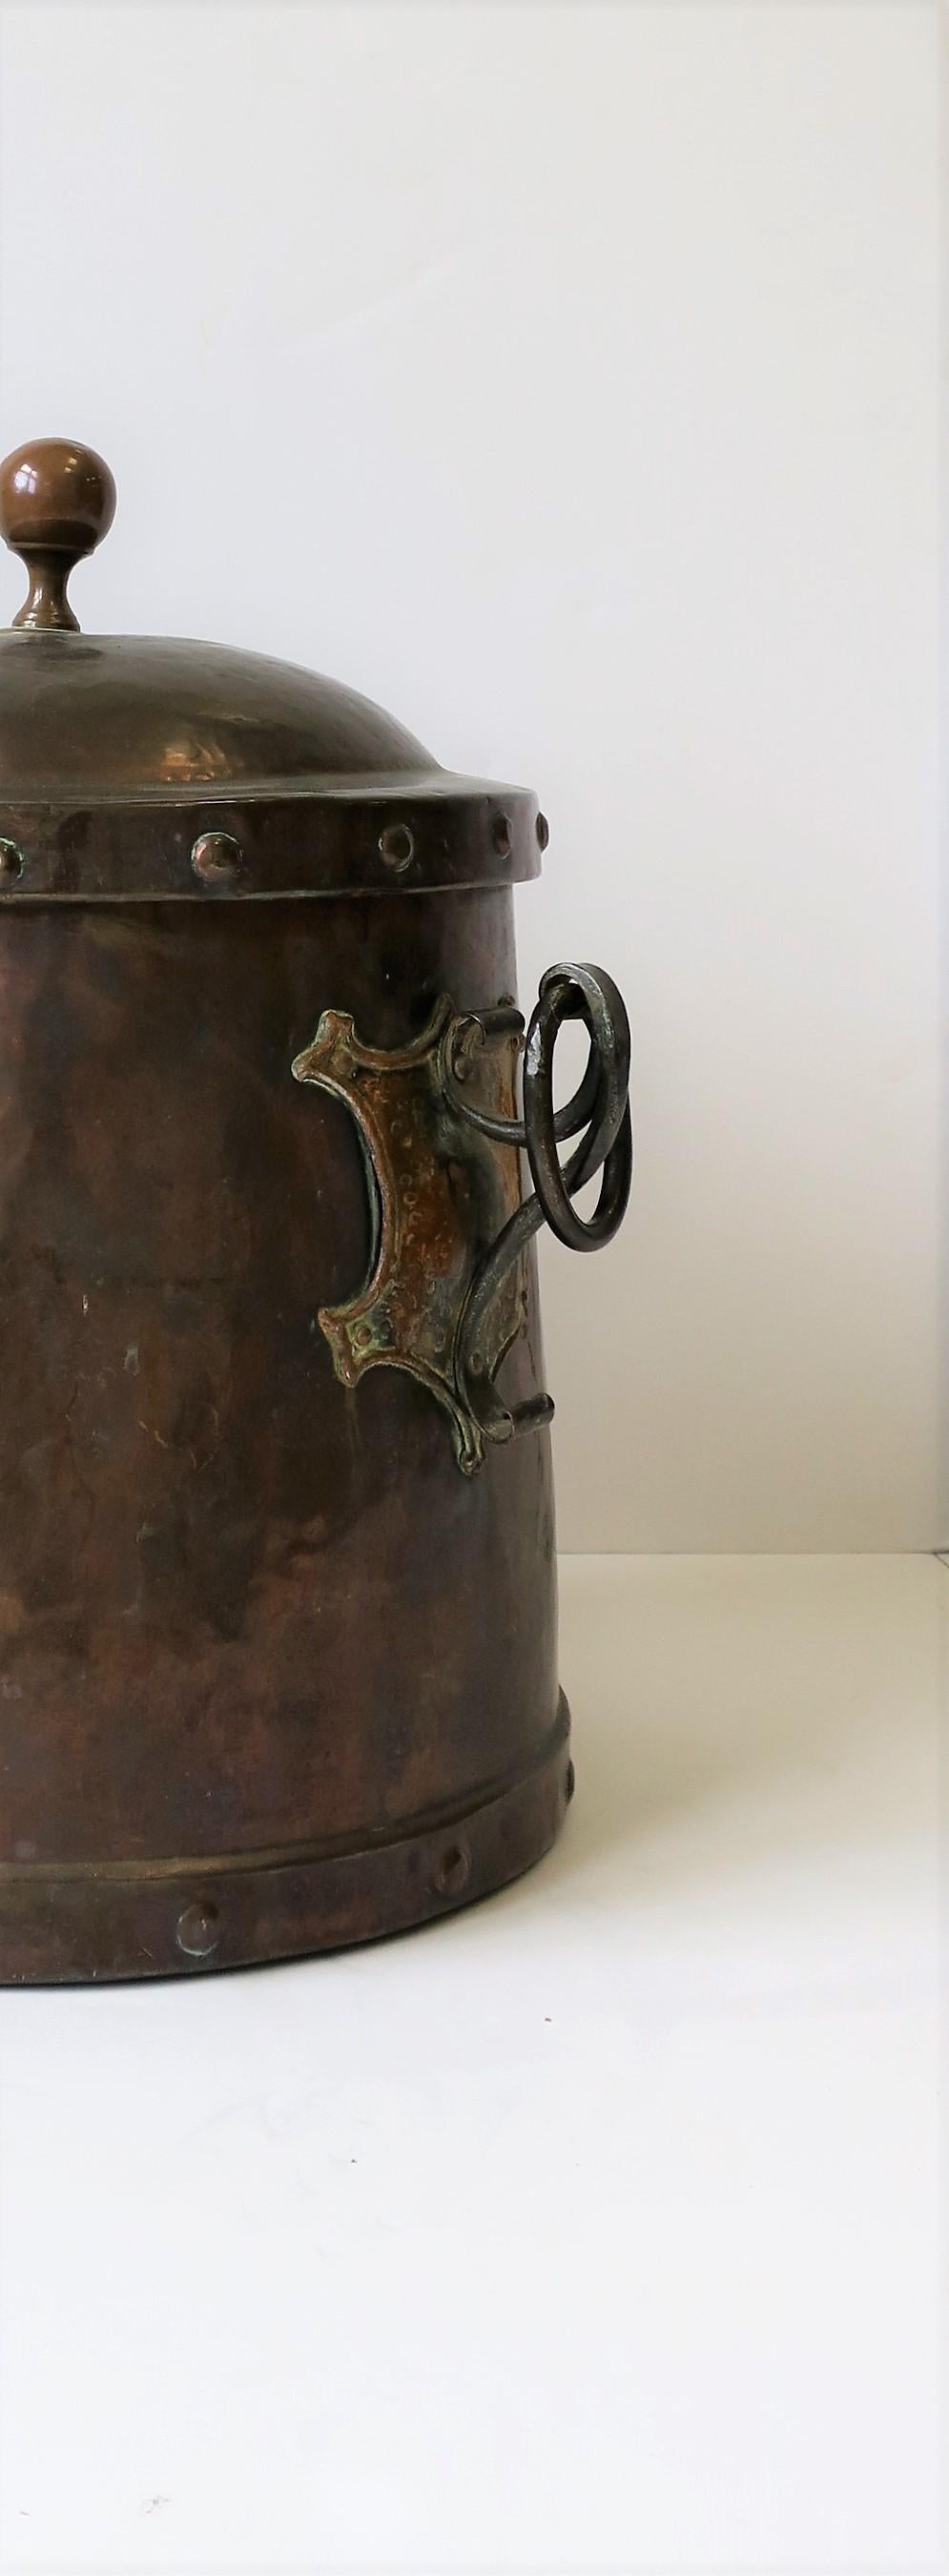 English Arts & Crafts Copper & Bronze Fireplace Chimney Pot, 19th Century For Sale 6